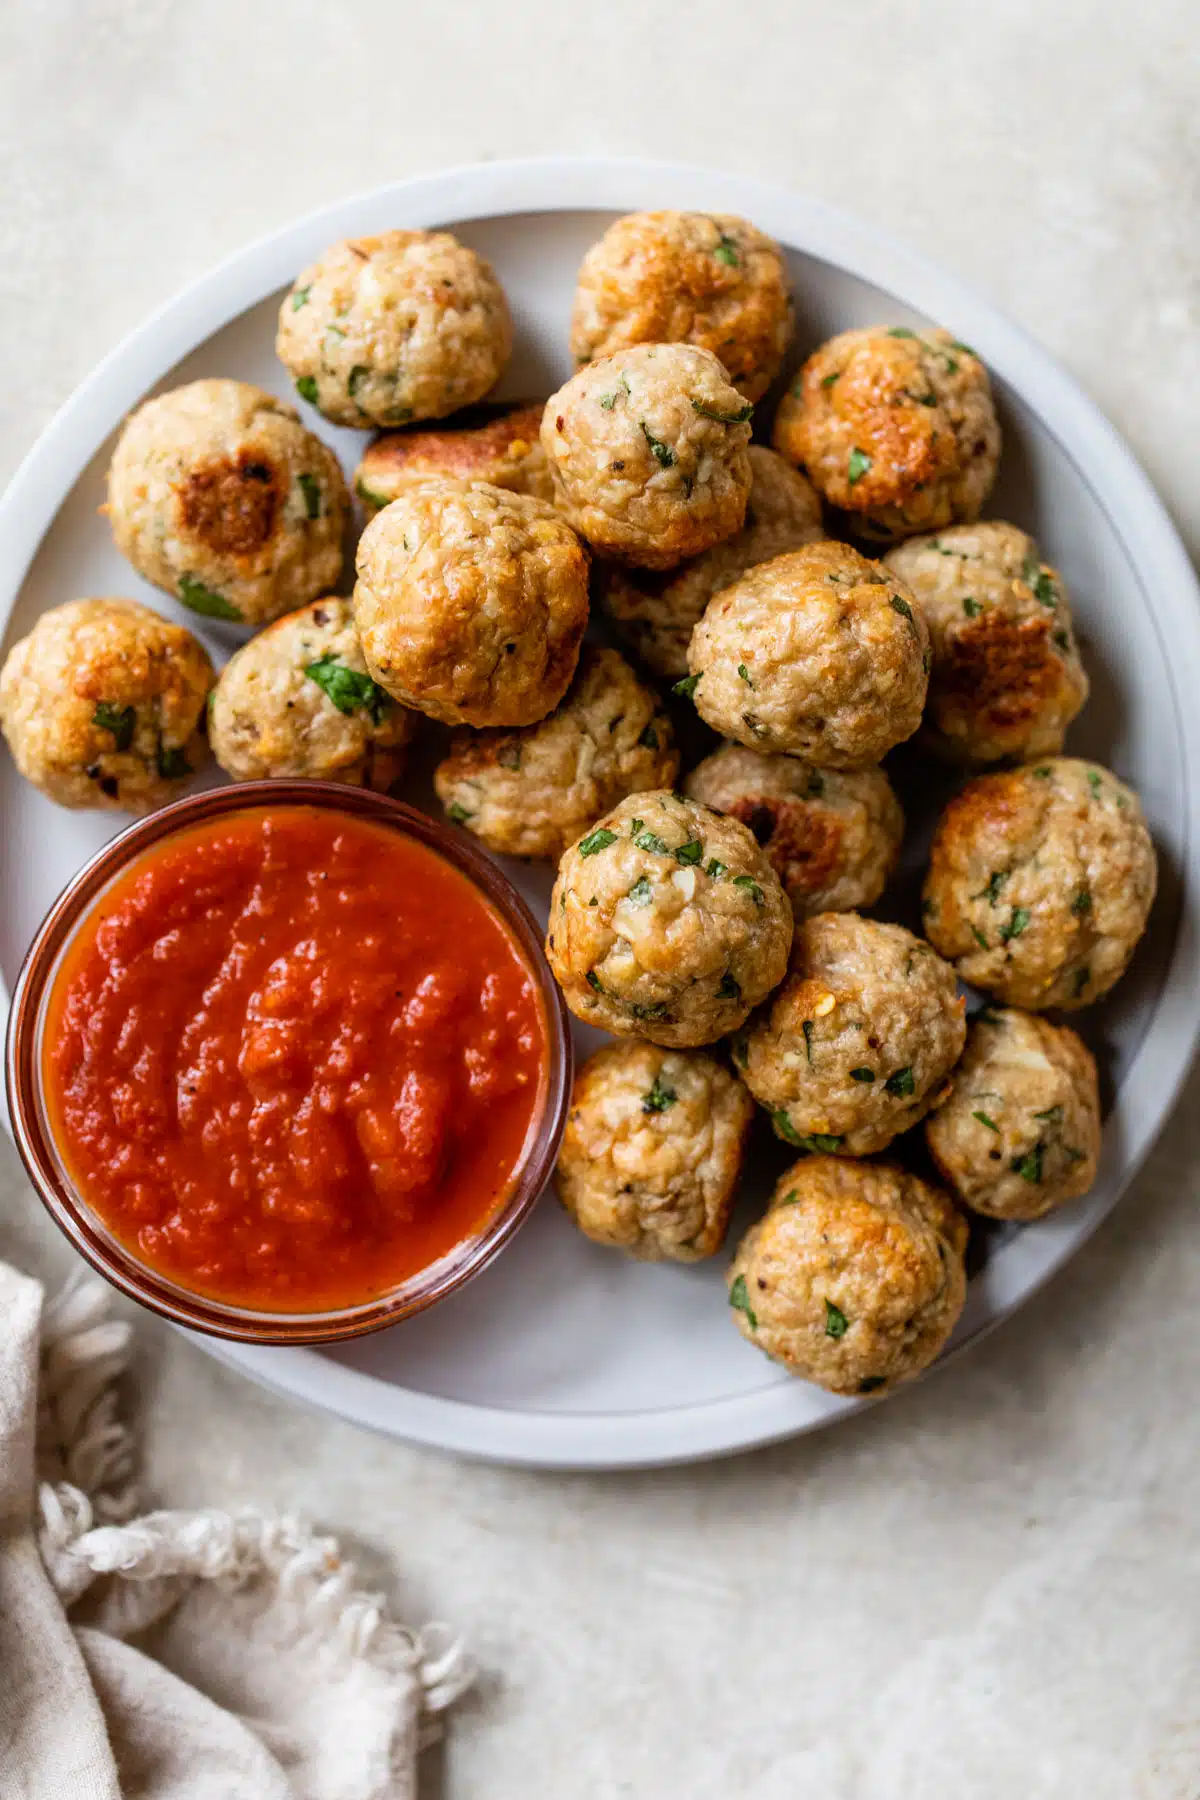 a plate filled with meatballs and a small bowl of marinara sauce